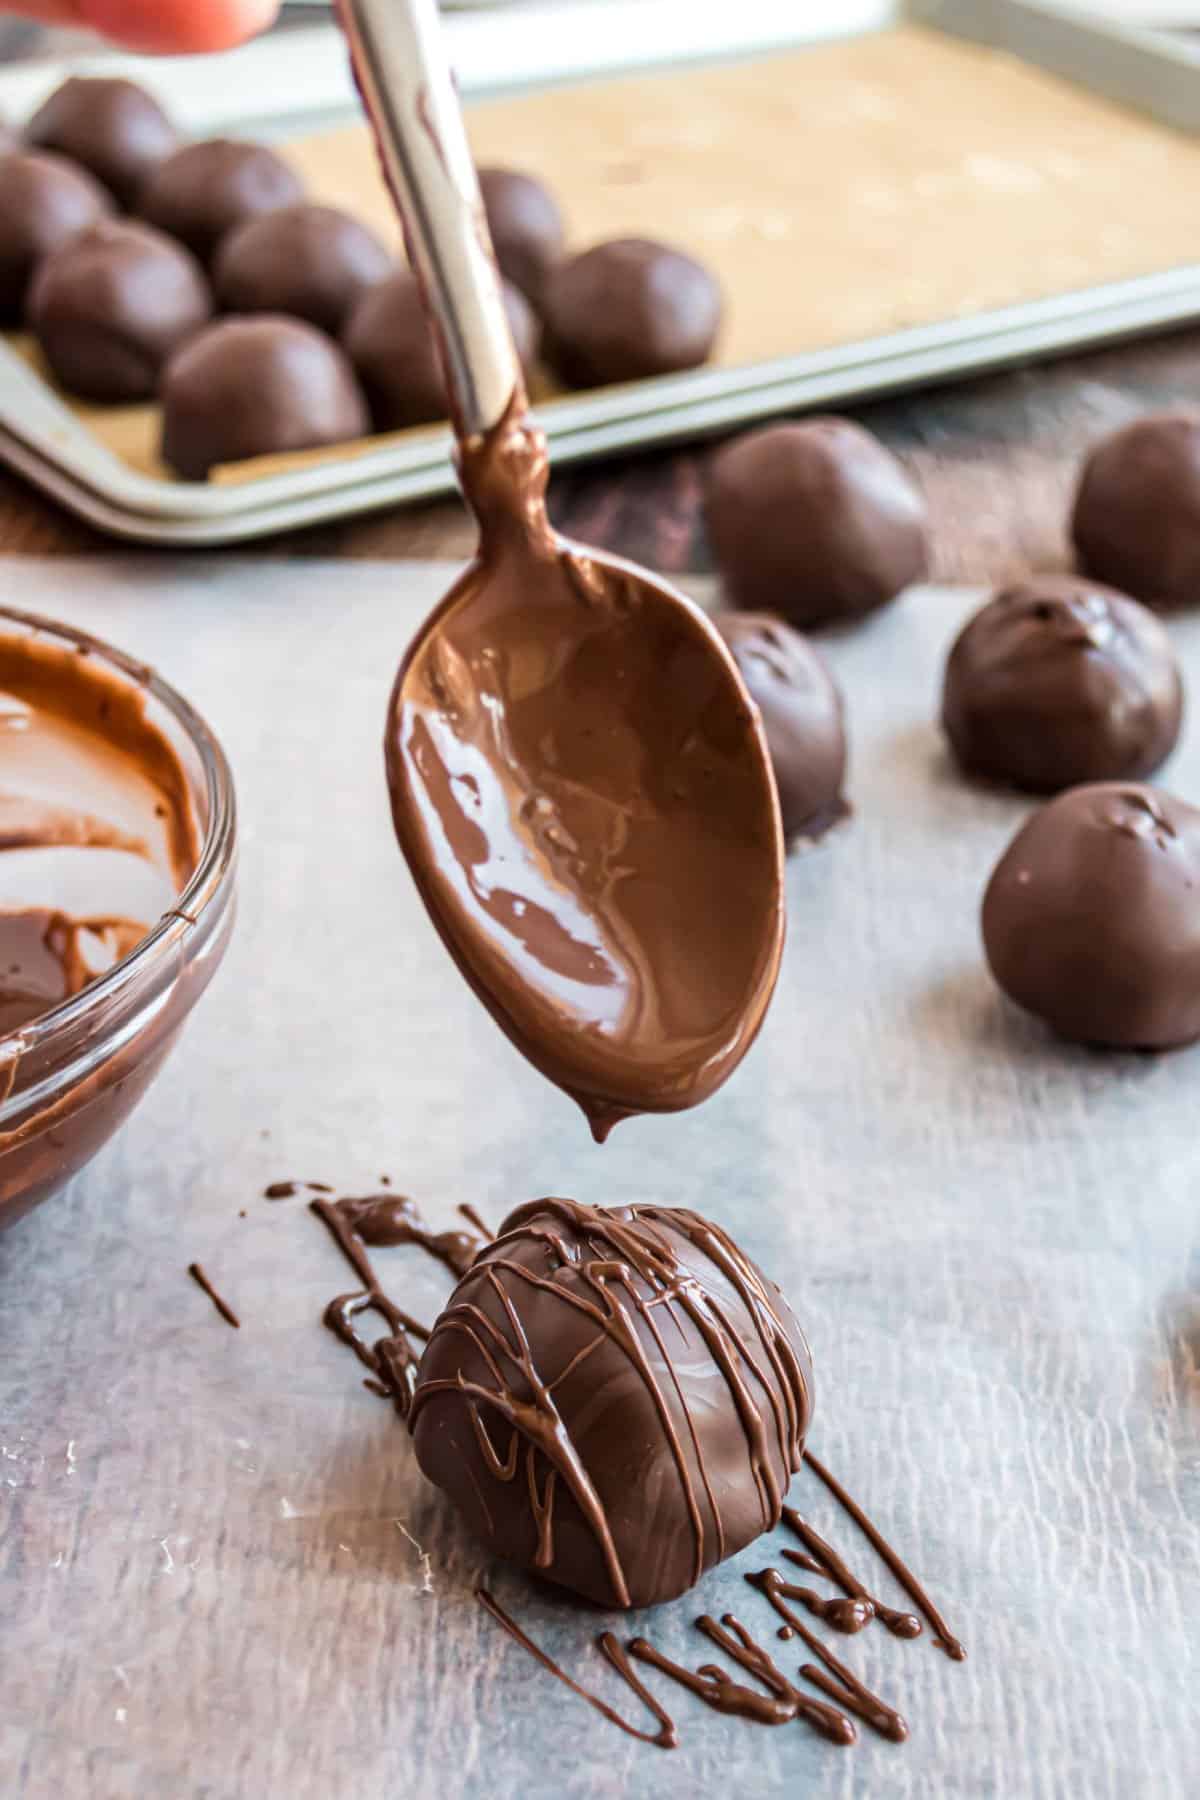 Melted chocolate drizzled on cookie dough truffle.